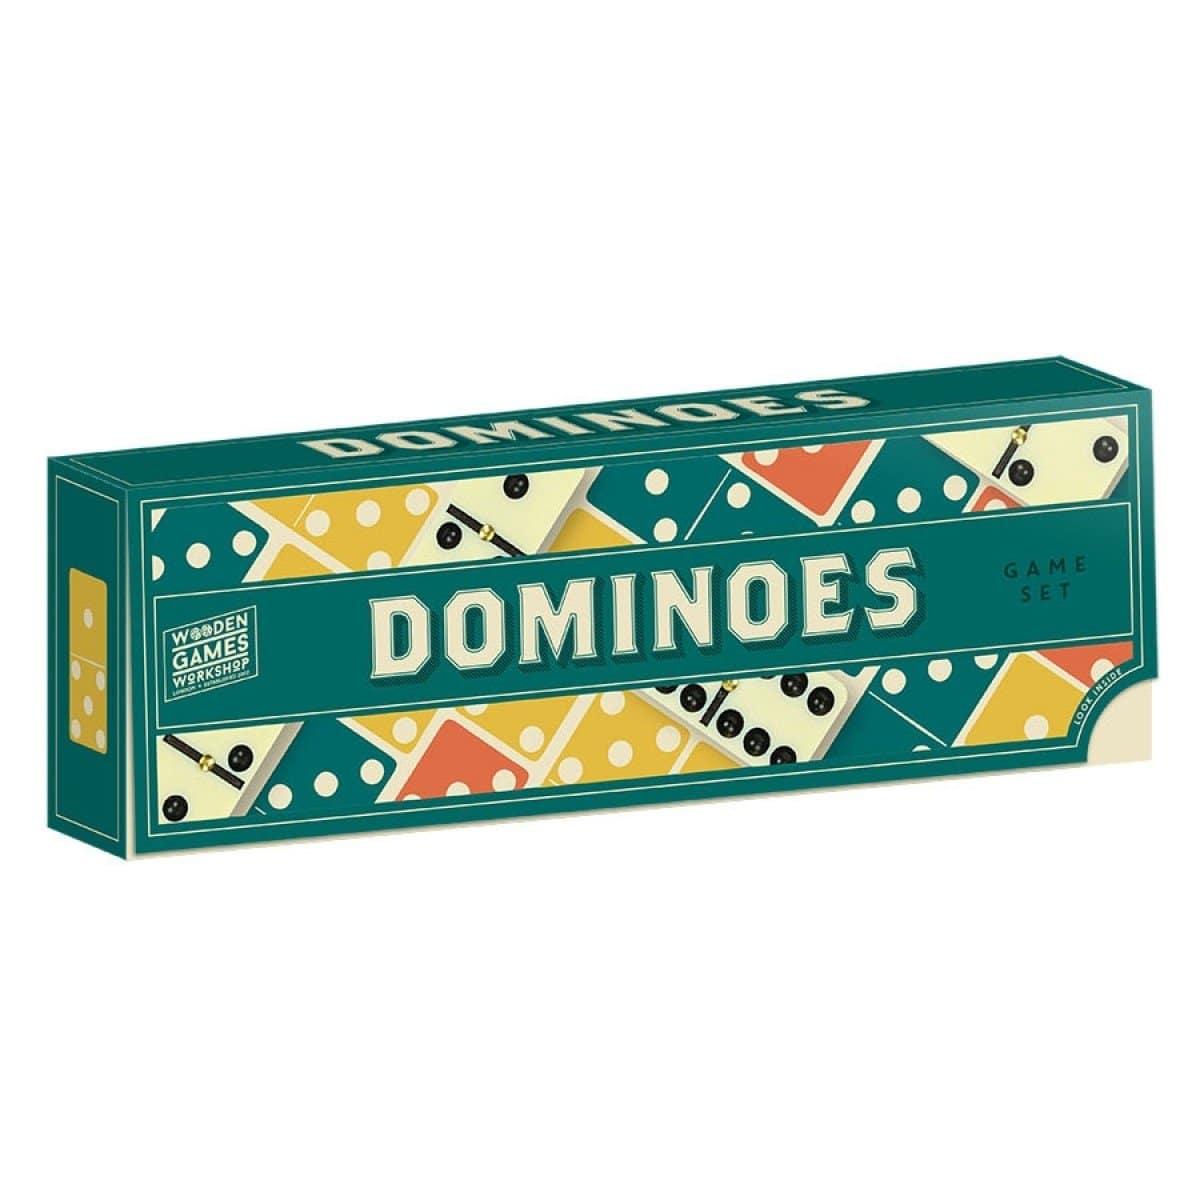 professor puzzle dominoes the classic domino game that we all know and love great fun for all generations indoor or outdoor activity for kids family friends multi players